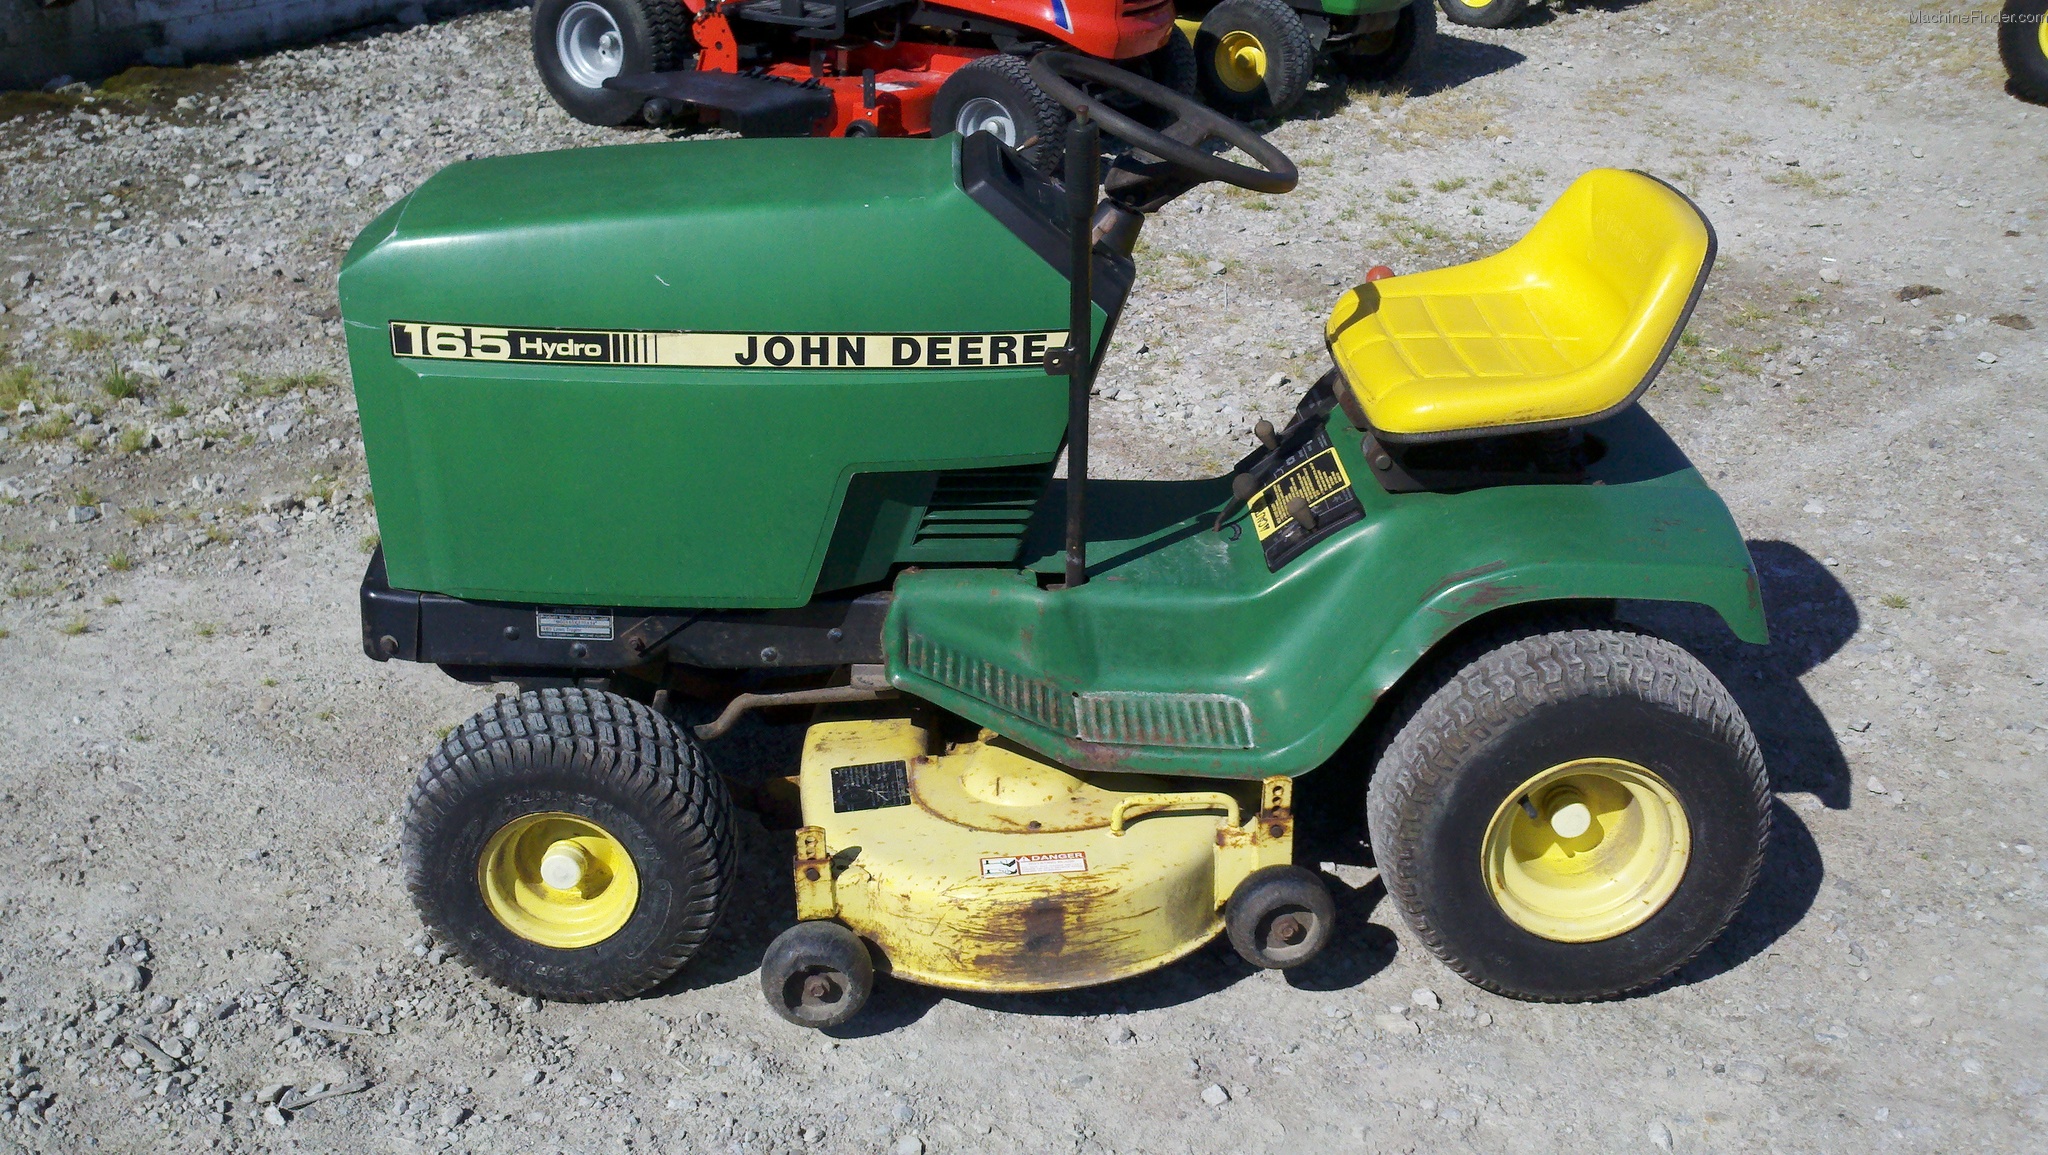 John Deere 165 Hydro Specs submited images.